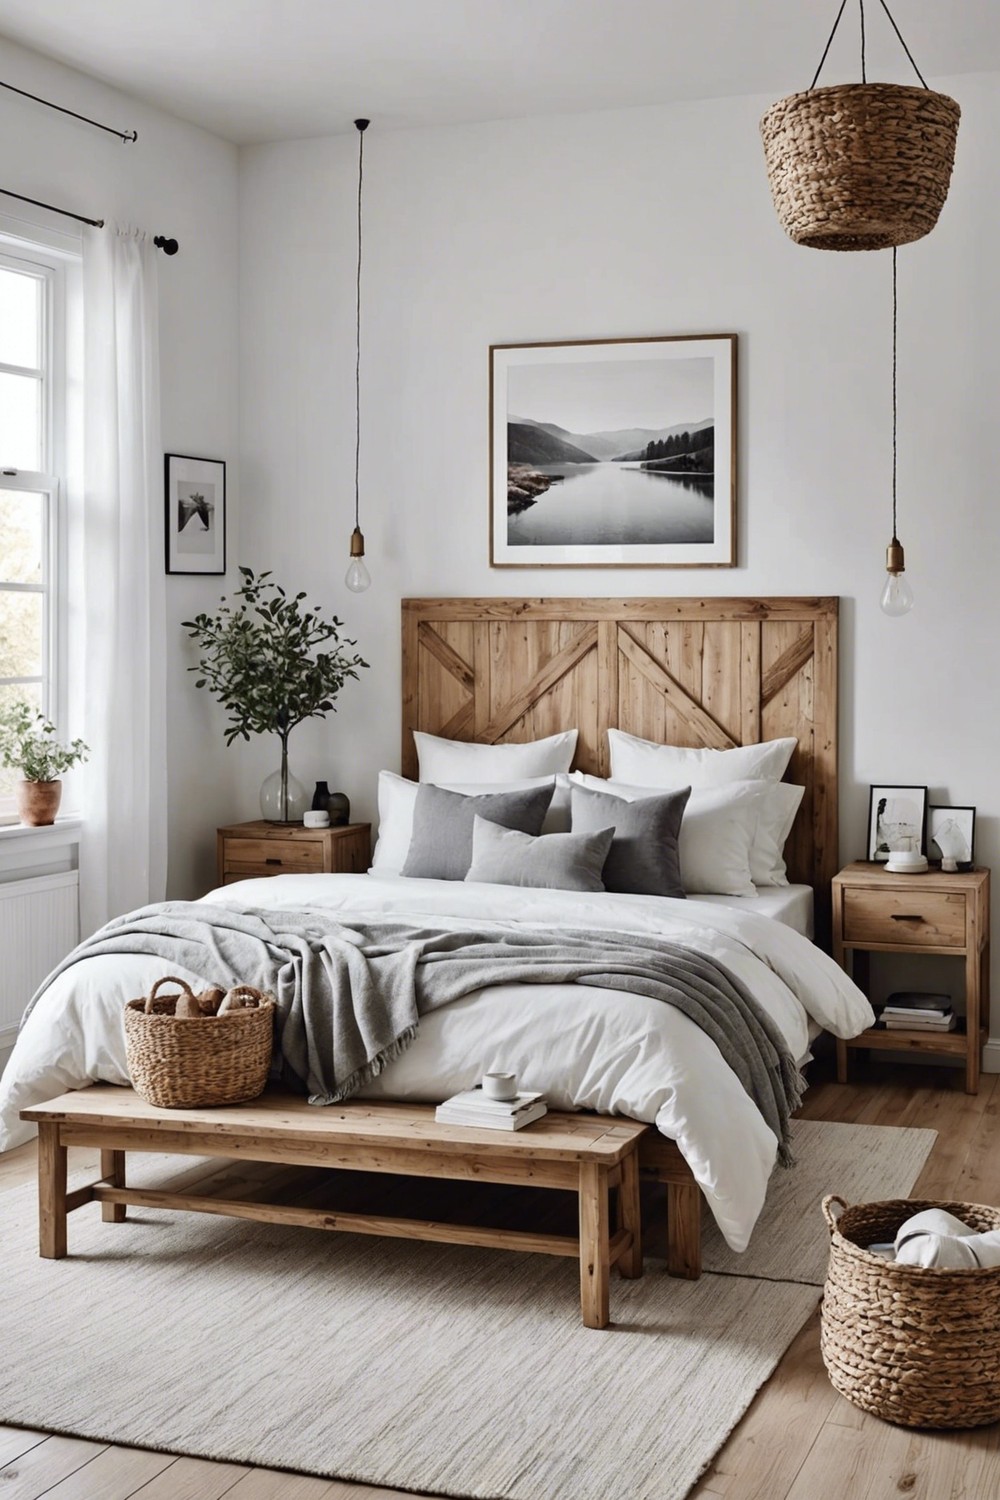 Scandinavian Chic: White Bedroom with Natural Wood Accents